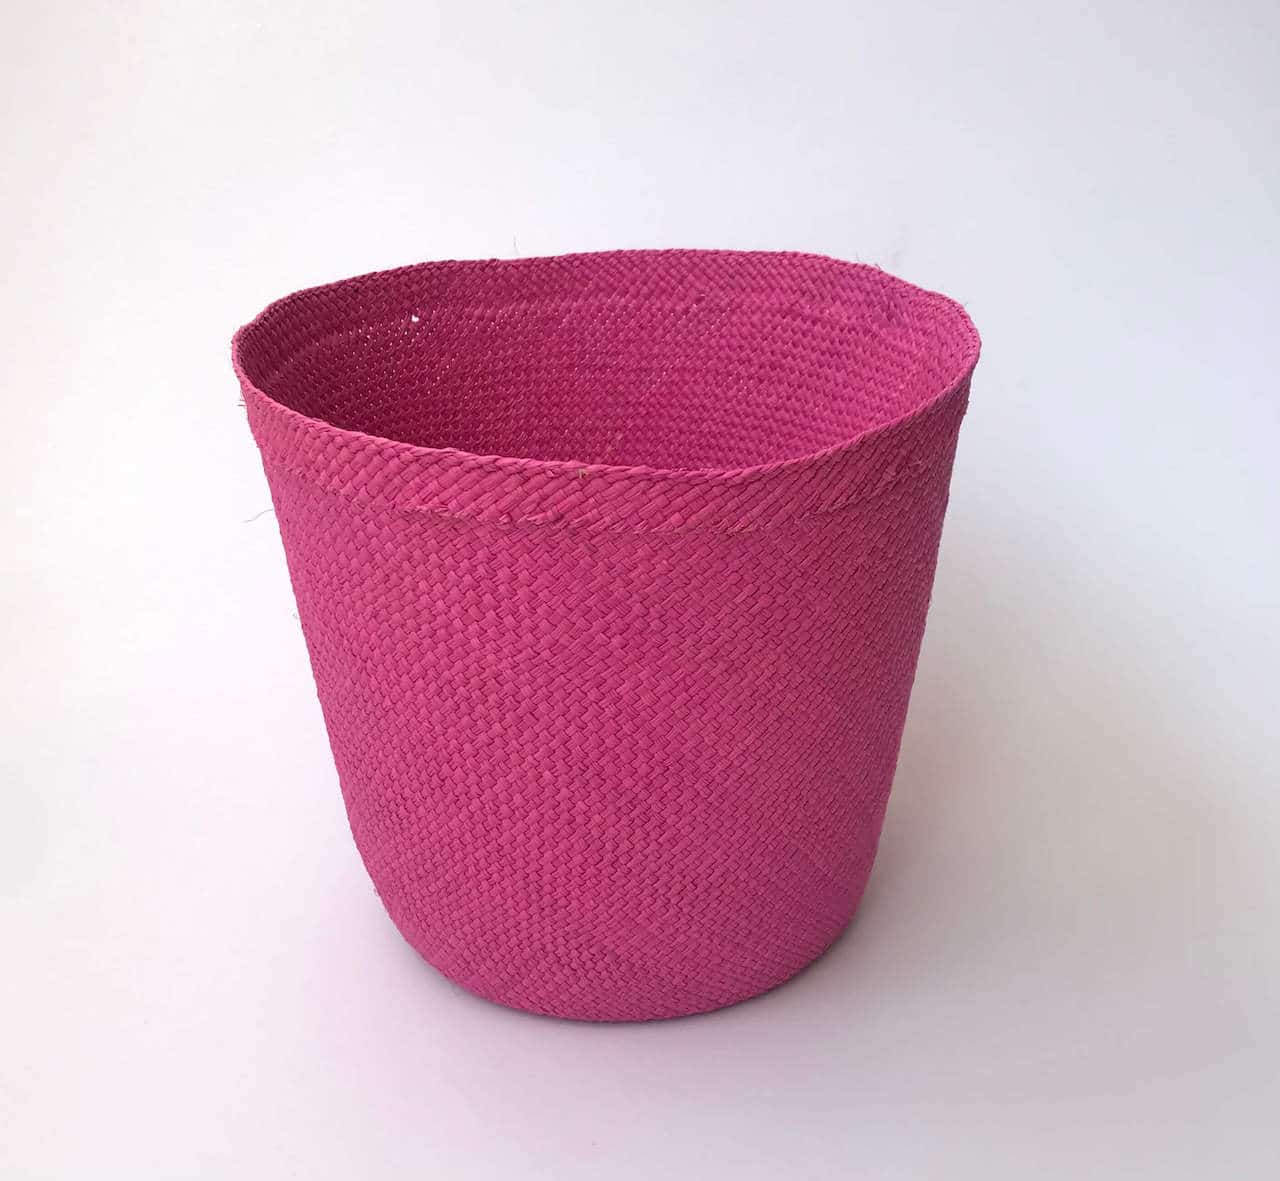  JanetBasket Plastic Basket with Cover-Pink